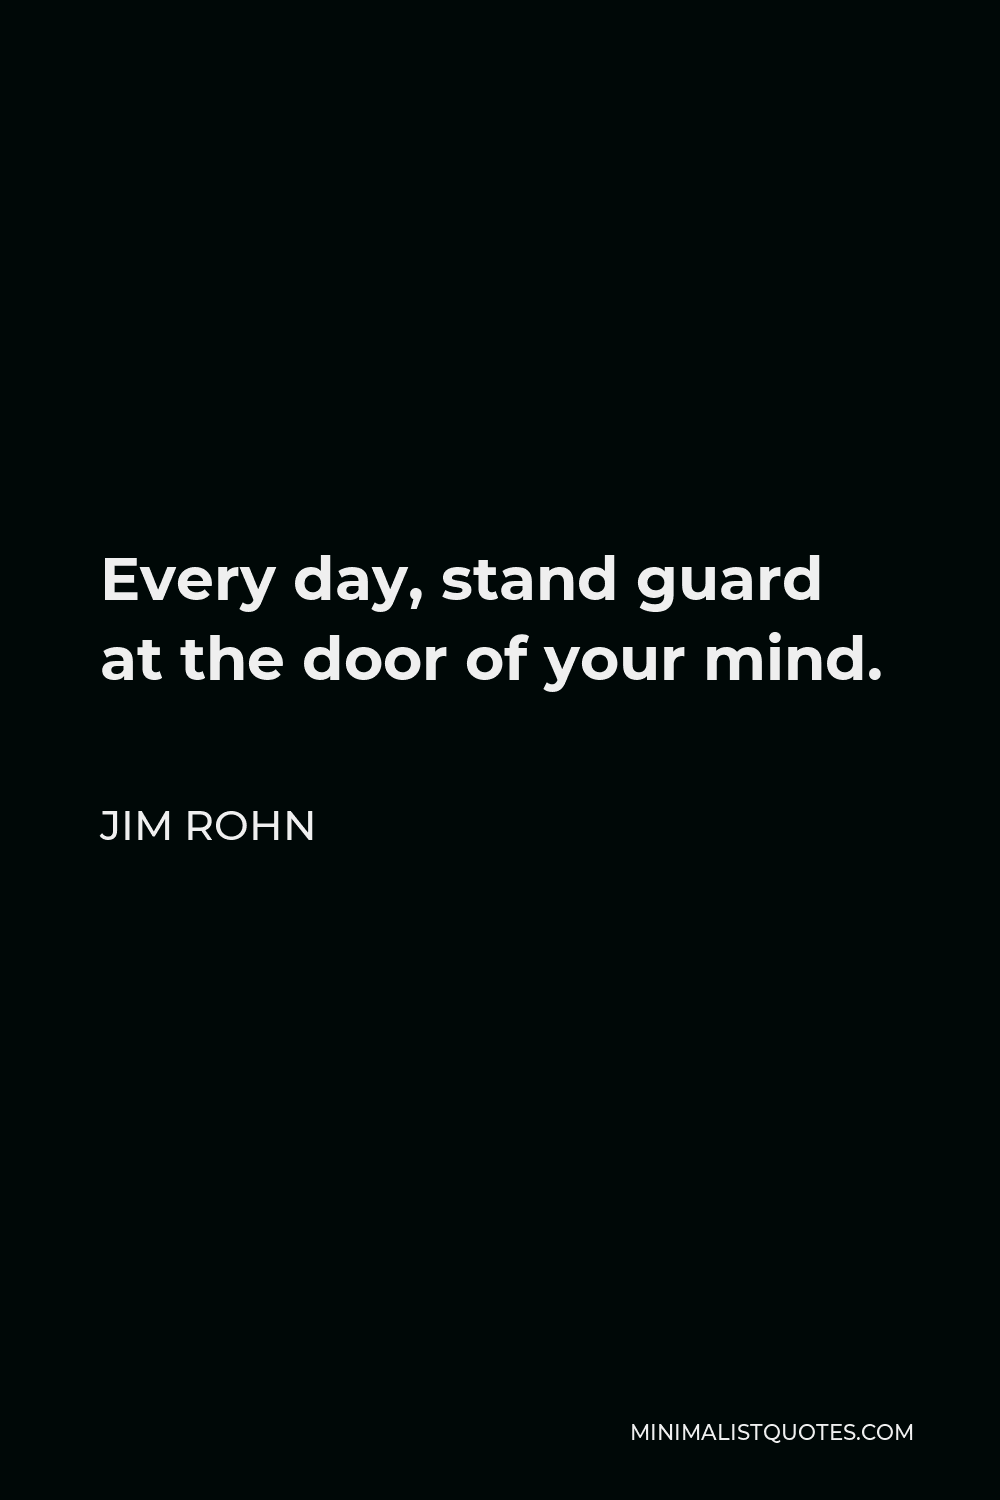 Jim Rohn Quote - Every day, stand guard at the door of your mind.